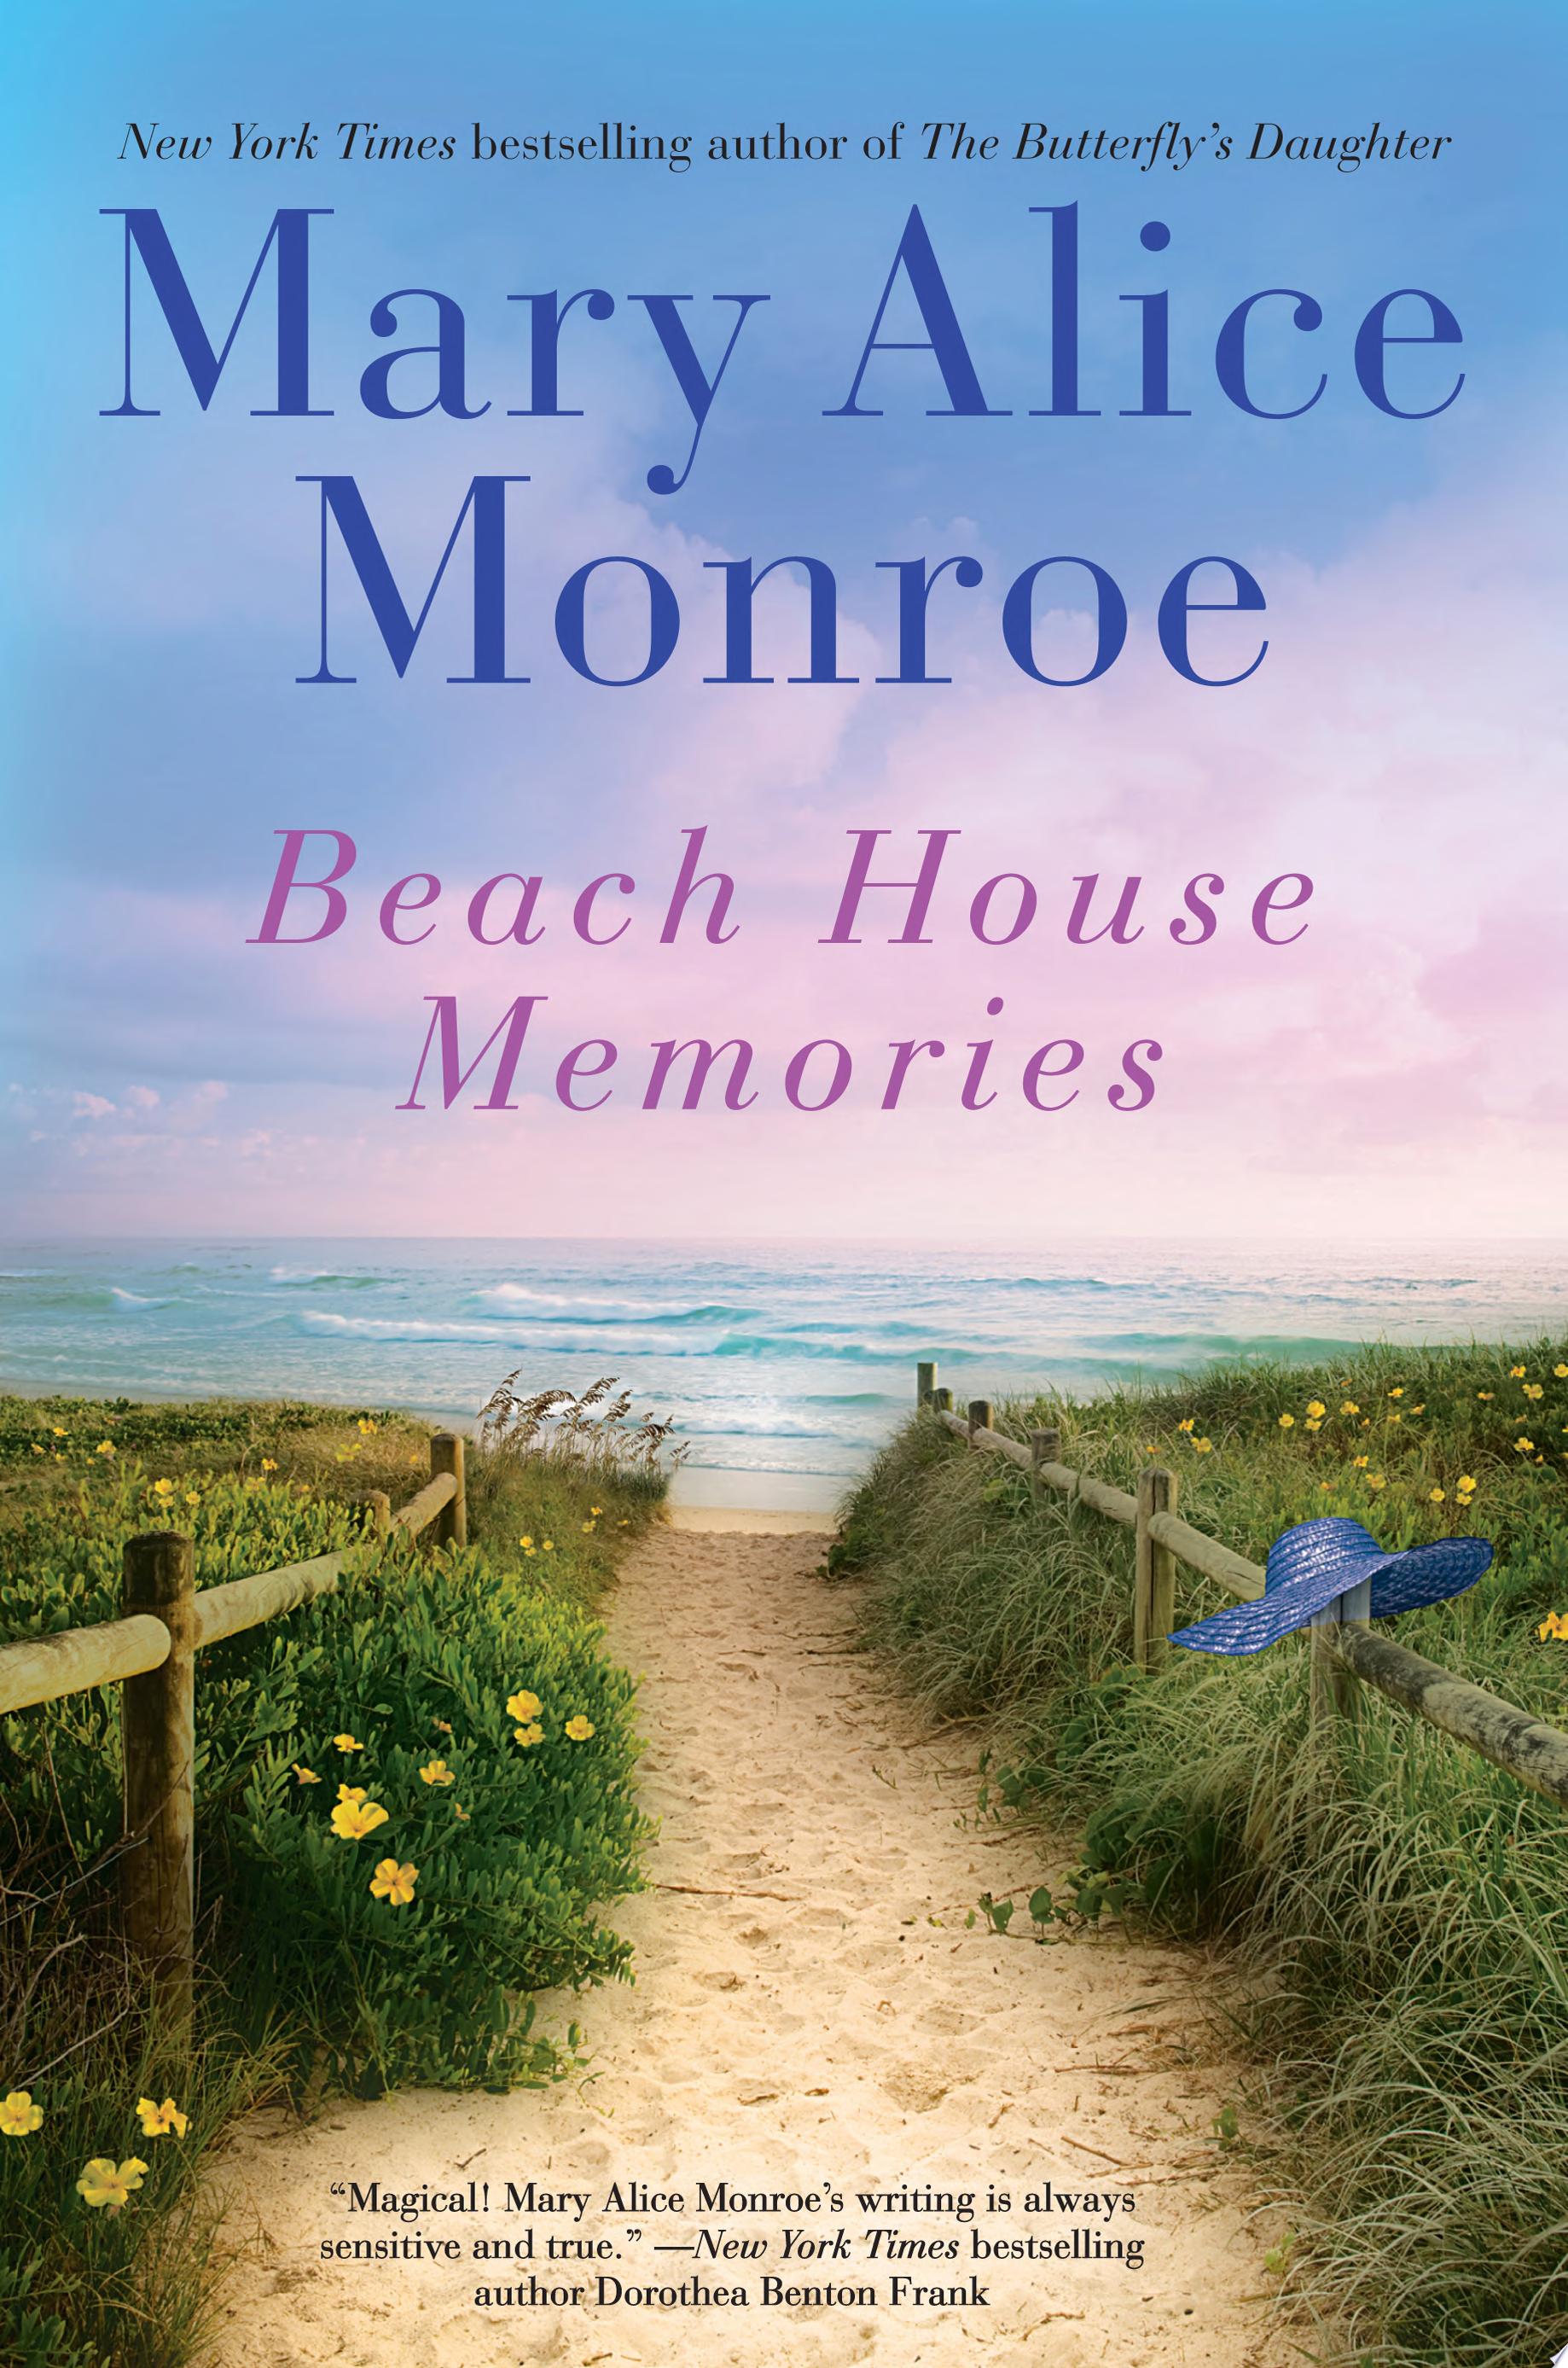 Image for "Beach House Memories"